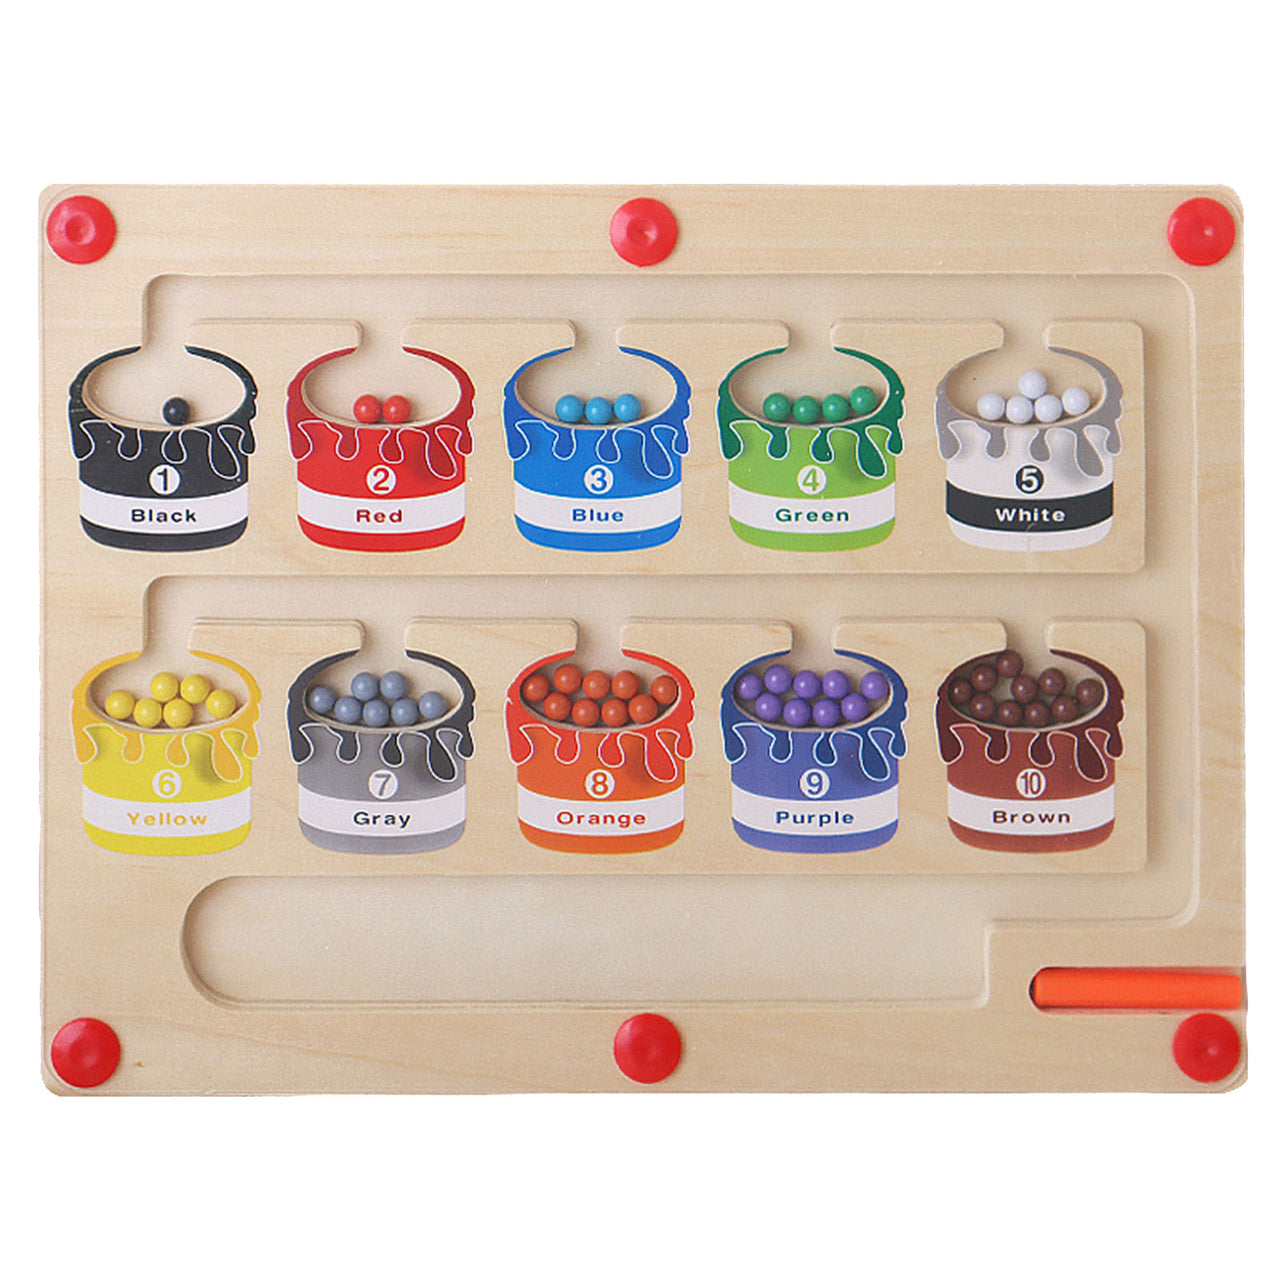 🔥LAST DAY 51% OFF 🔥Magnetic Color and Number Maze Learning Education Toys